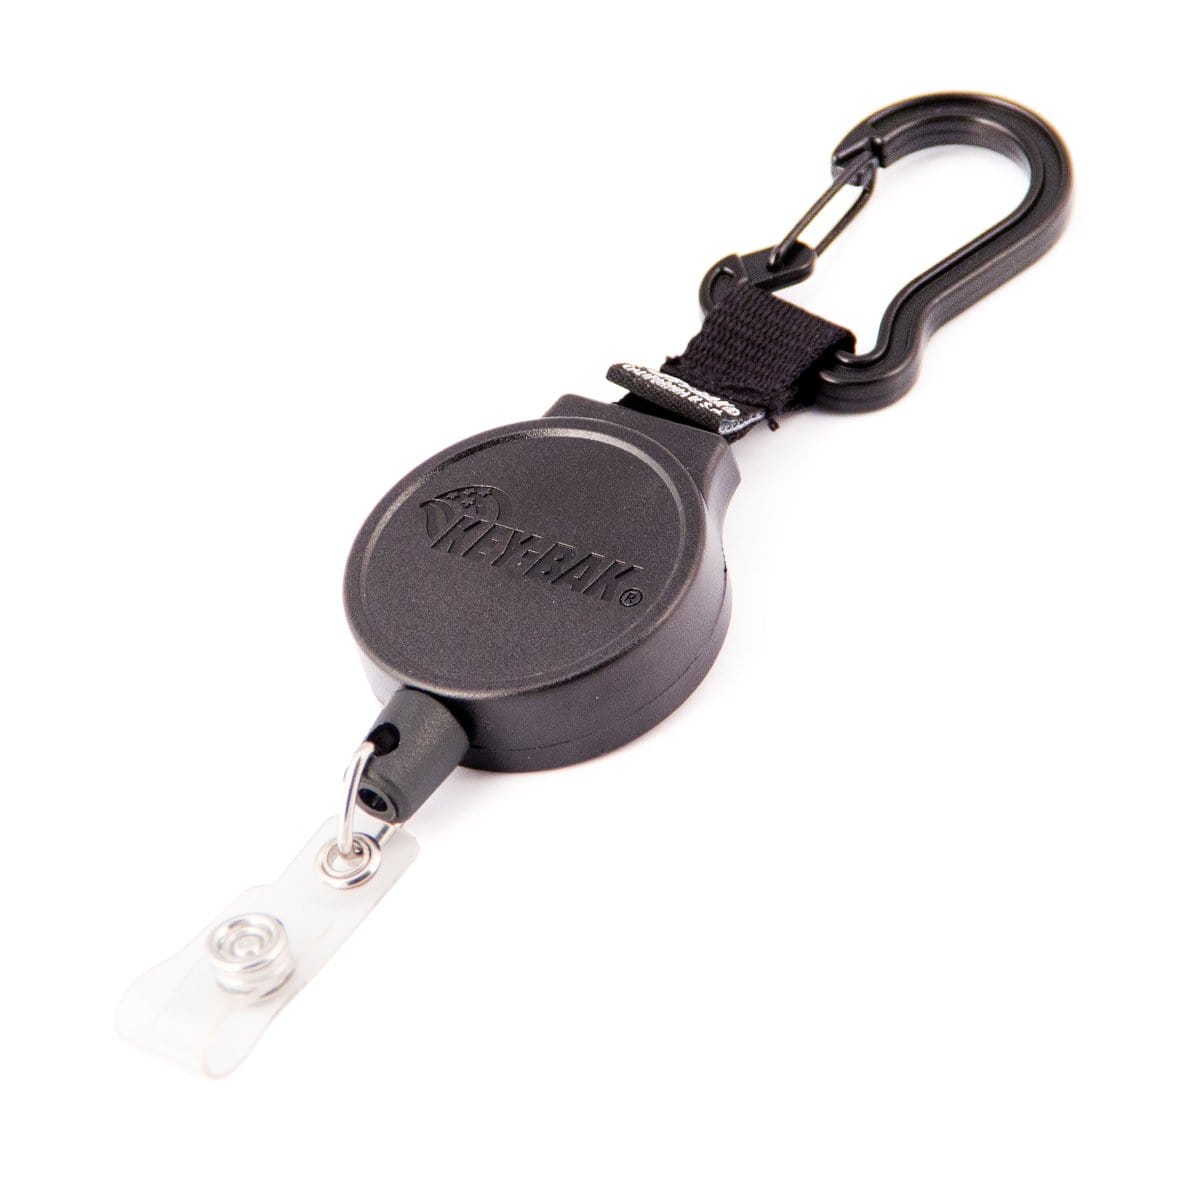 Key-Bak Mid Size Key Ring Badge Reel with Belt Clip (6) and more